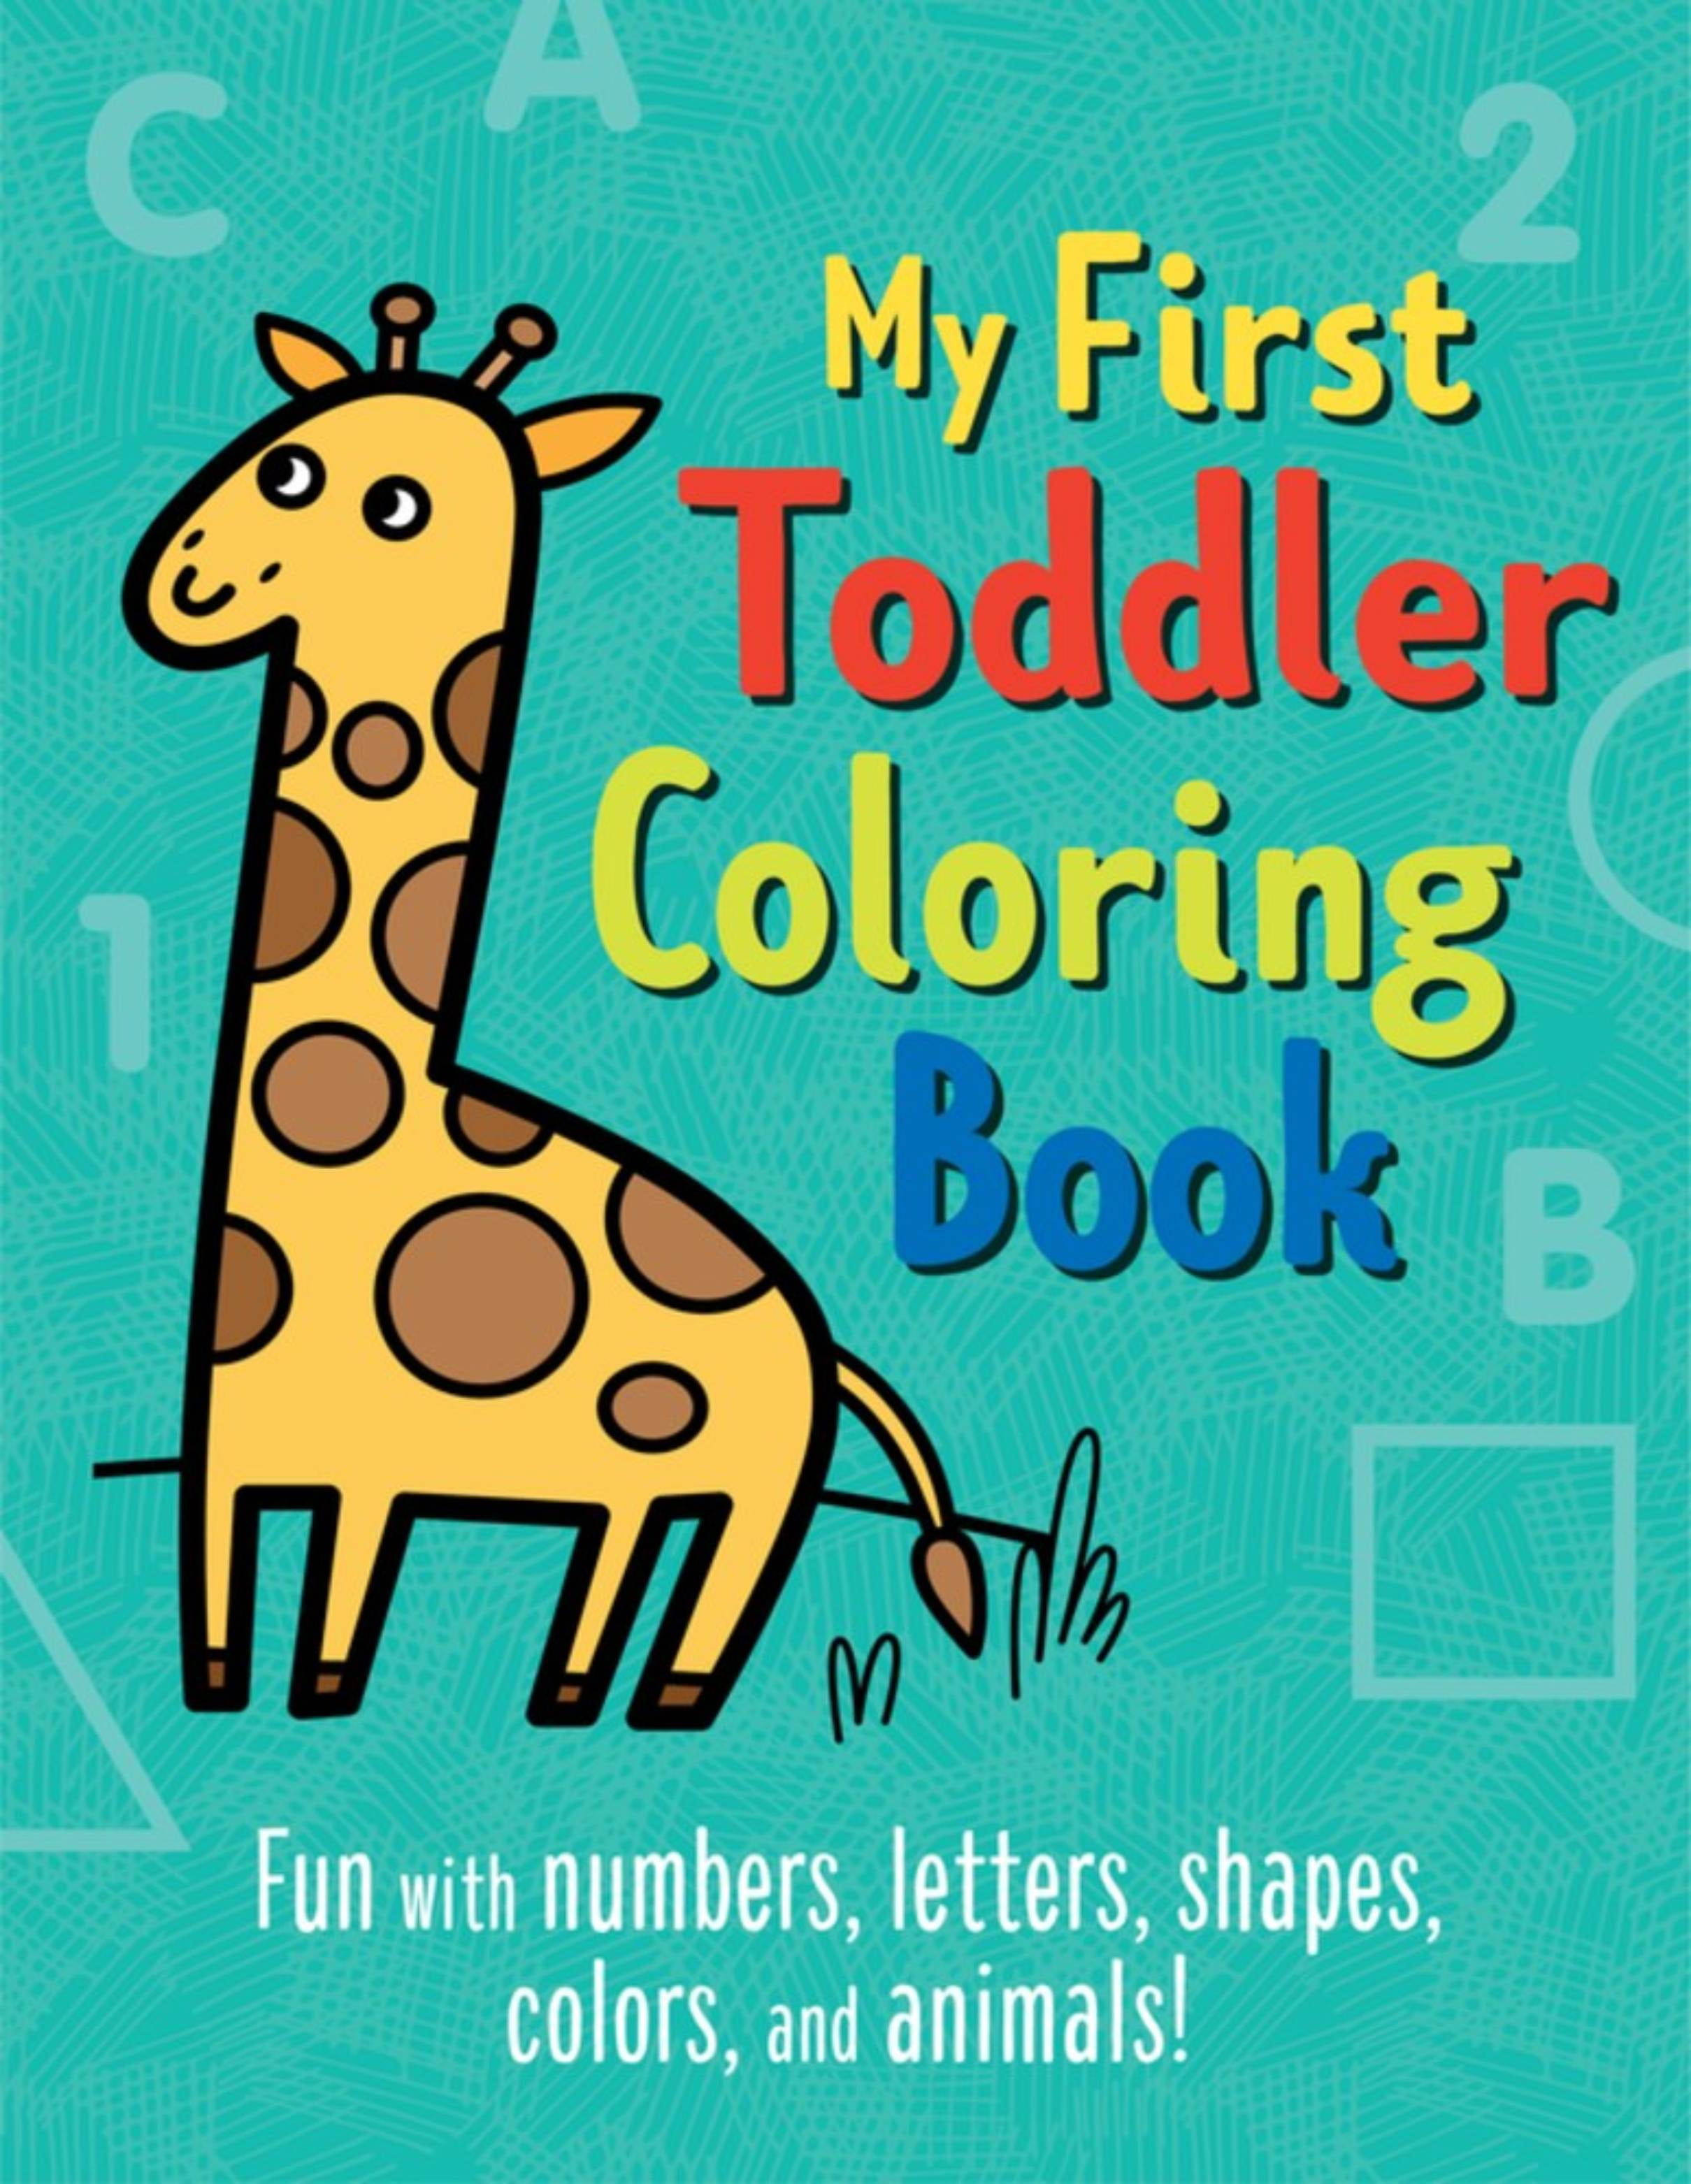 CHILDREN'S MY FIRST ANIMALS LEARNING COLOURING ACTIVITY BOOK  18 PENCILS AGE 3-4 